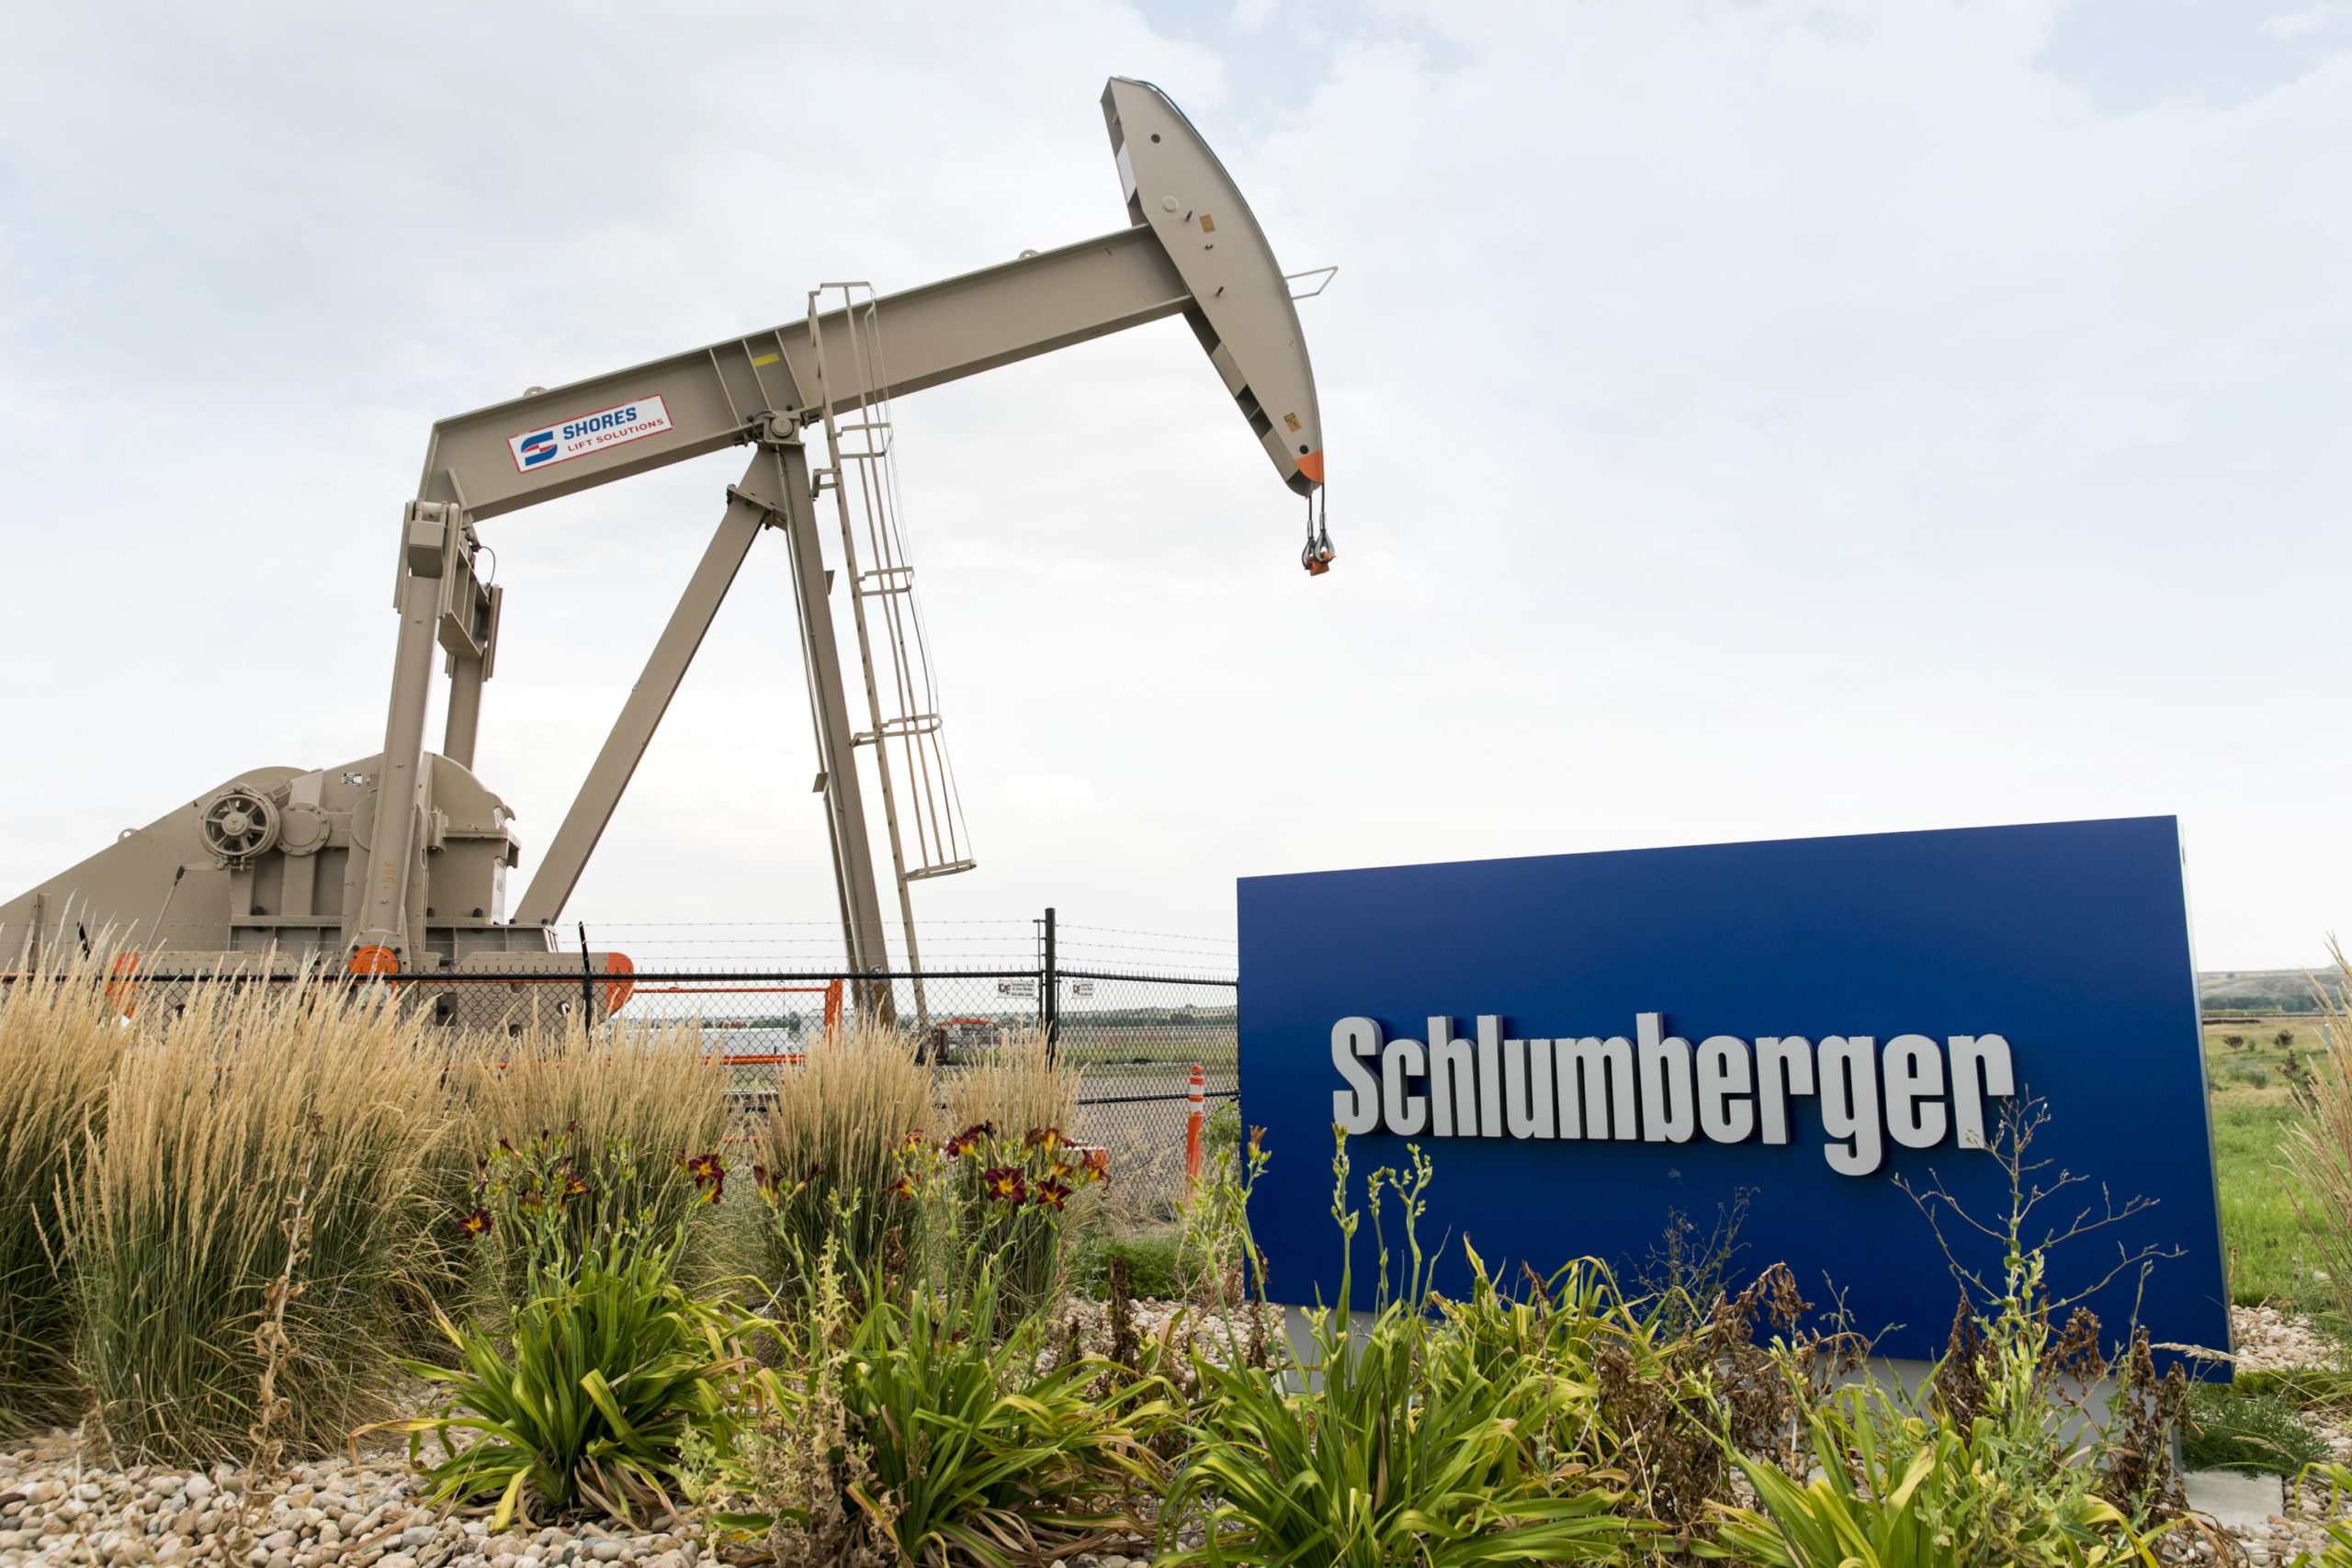 A logo sign and oil pump outside of a facility occupied by Schlumberger in Windsor, Colorado, on July 21, 2018. (Photo by Kristoffer Tripplaar/Sipa USA)(Sipa via AP Images)